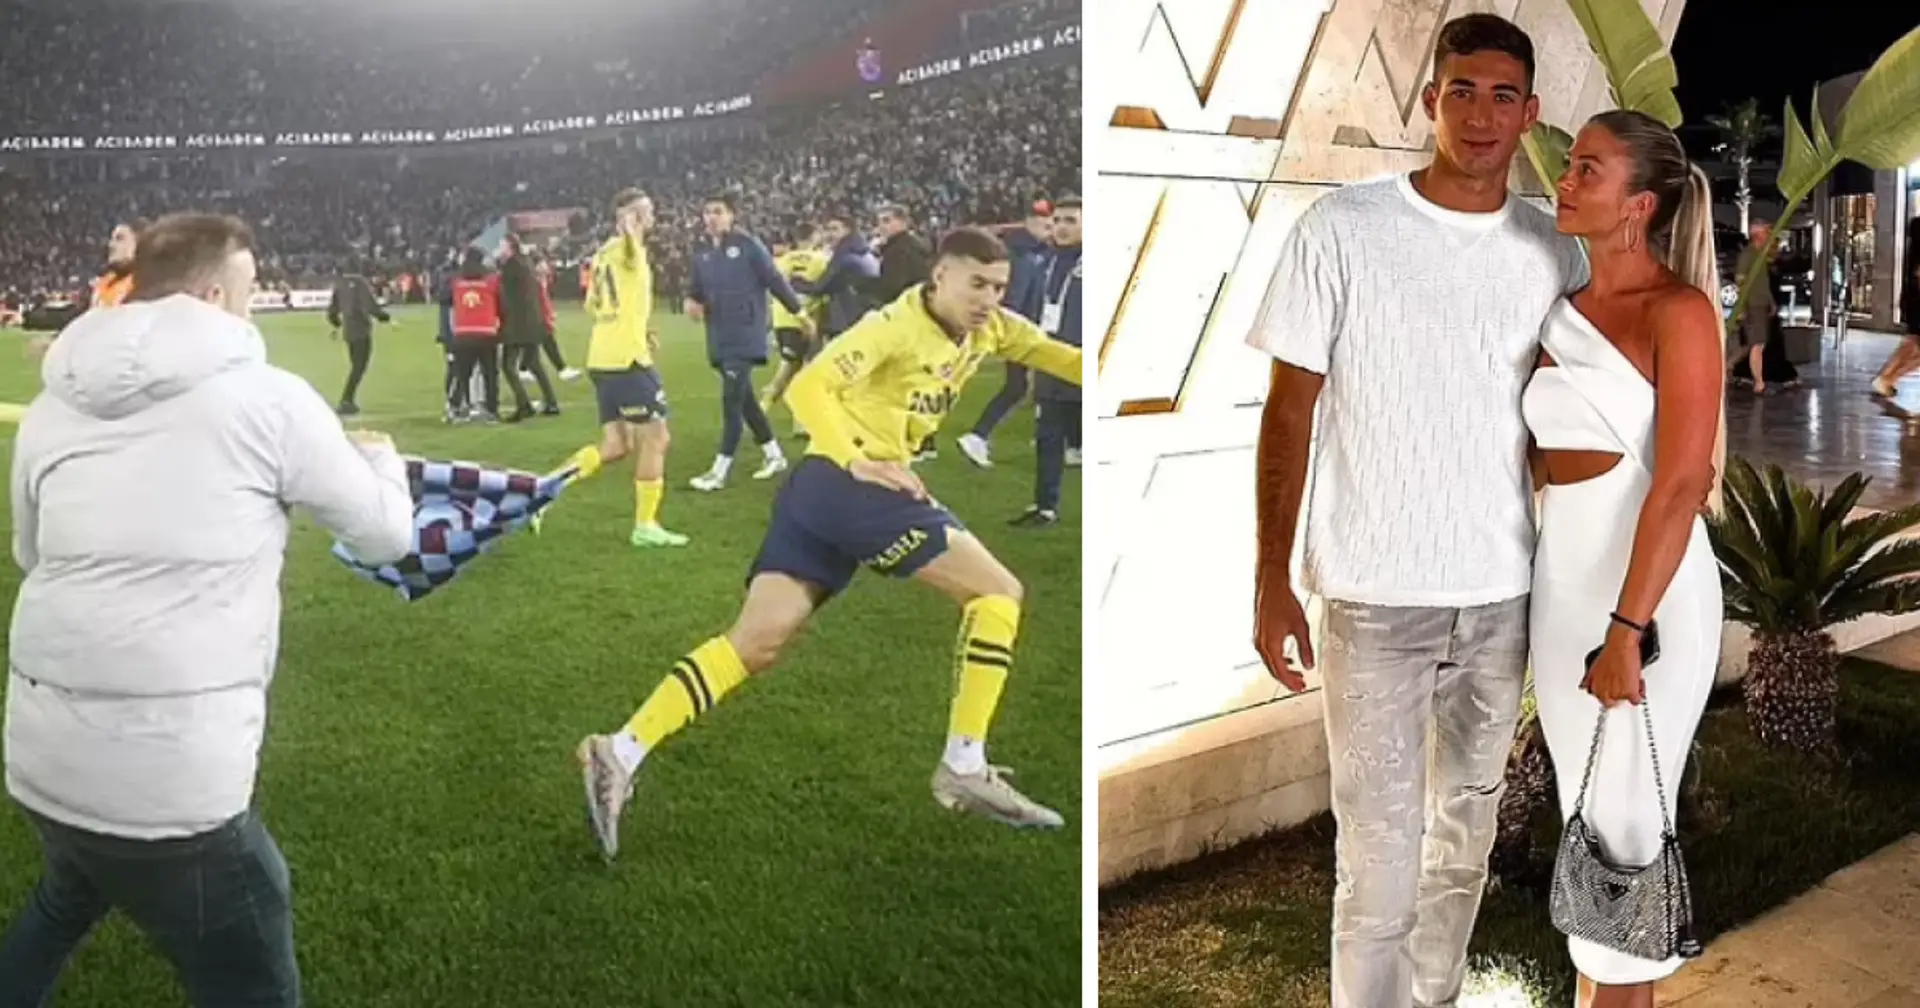 'My heart stopped': Fenerbahce player's girlfriend left speechless after seeing him being attacked with corner flag